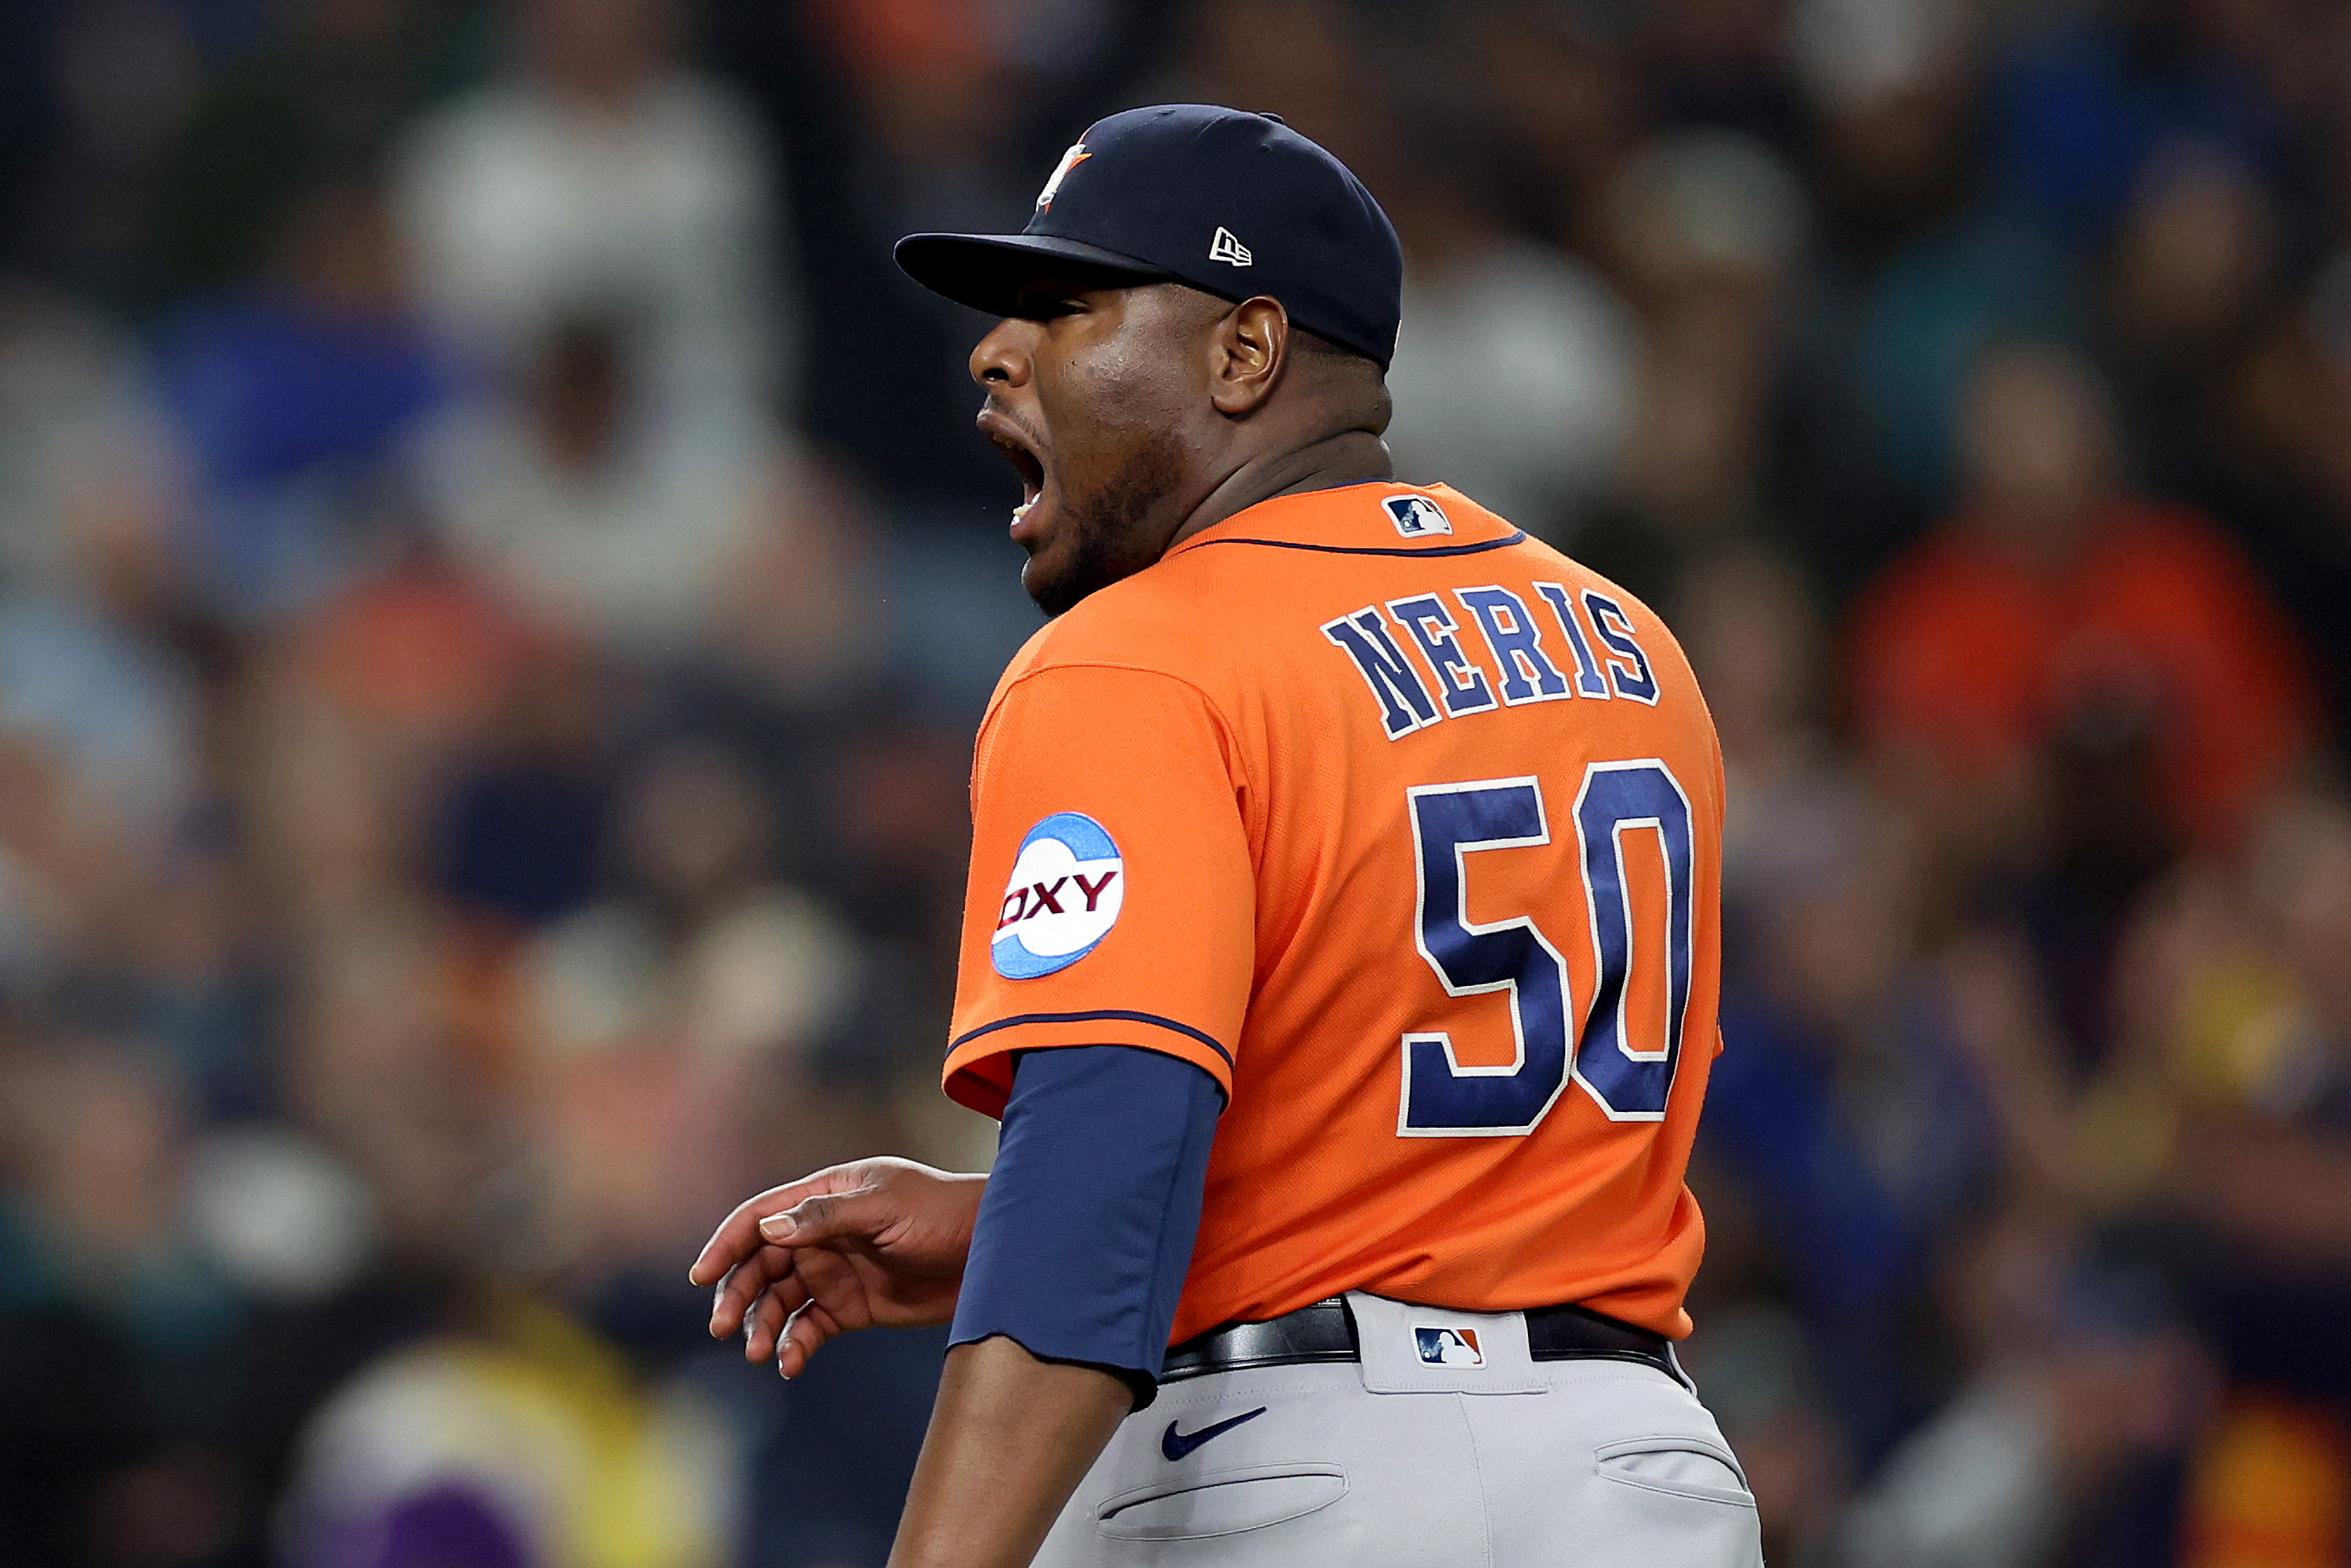 Hector Neris of the Houston Astros reacts after striking out Julio Rodriguez of the Seattle Mariners during the sixth inning at T-Mobile Park on September 27, 2023 in Seattle, Washington.